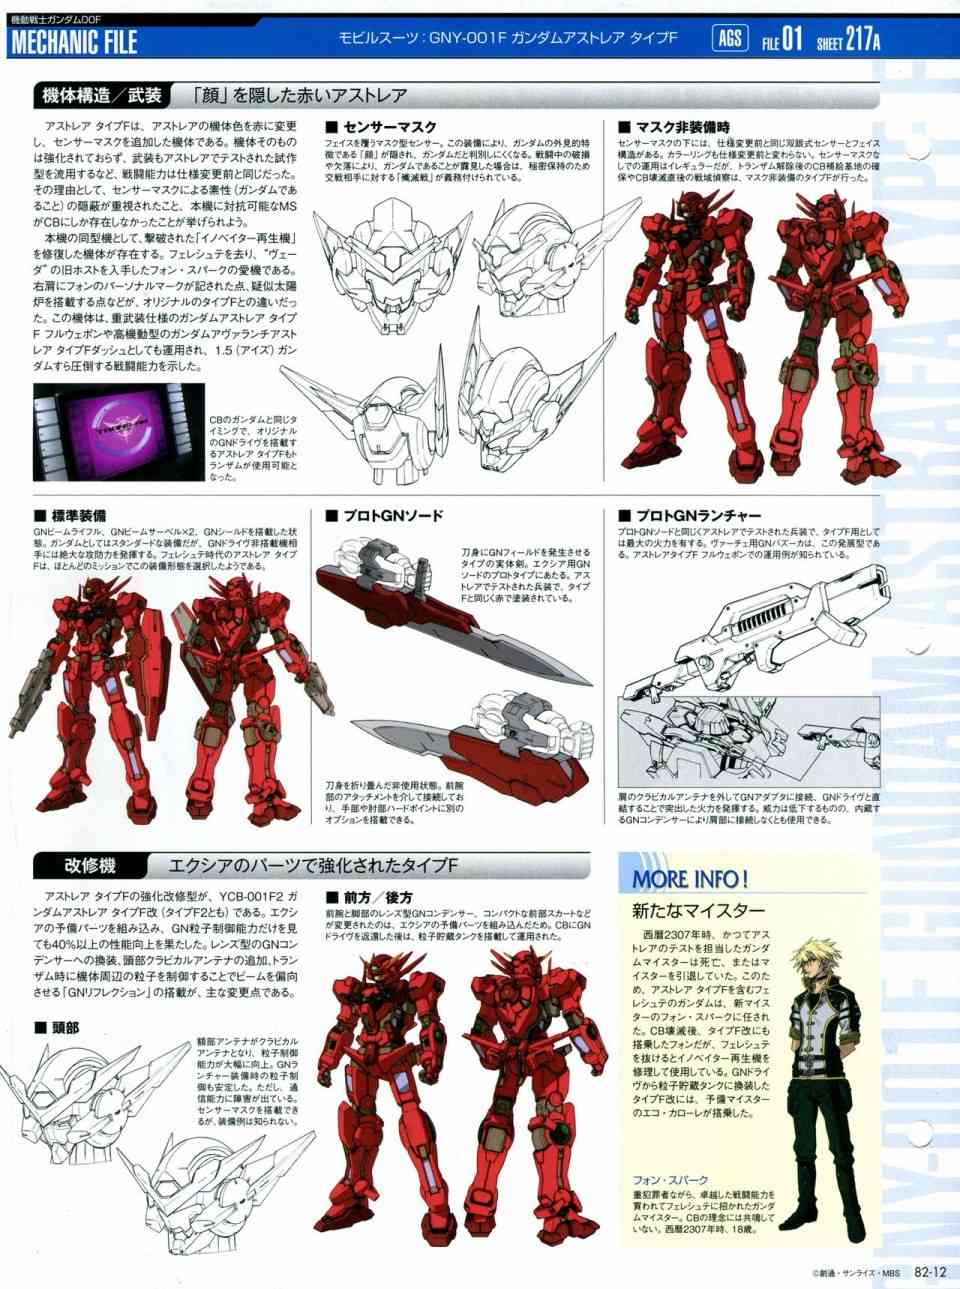 The Official Gundam Perfect File  - 第81-90話(1/7) - 8